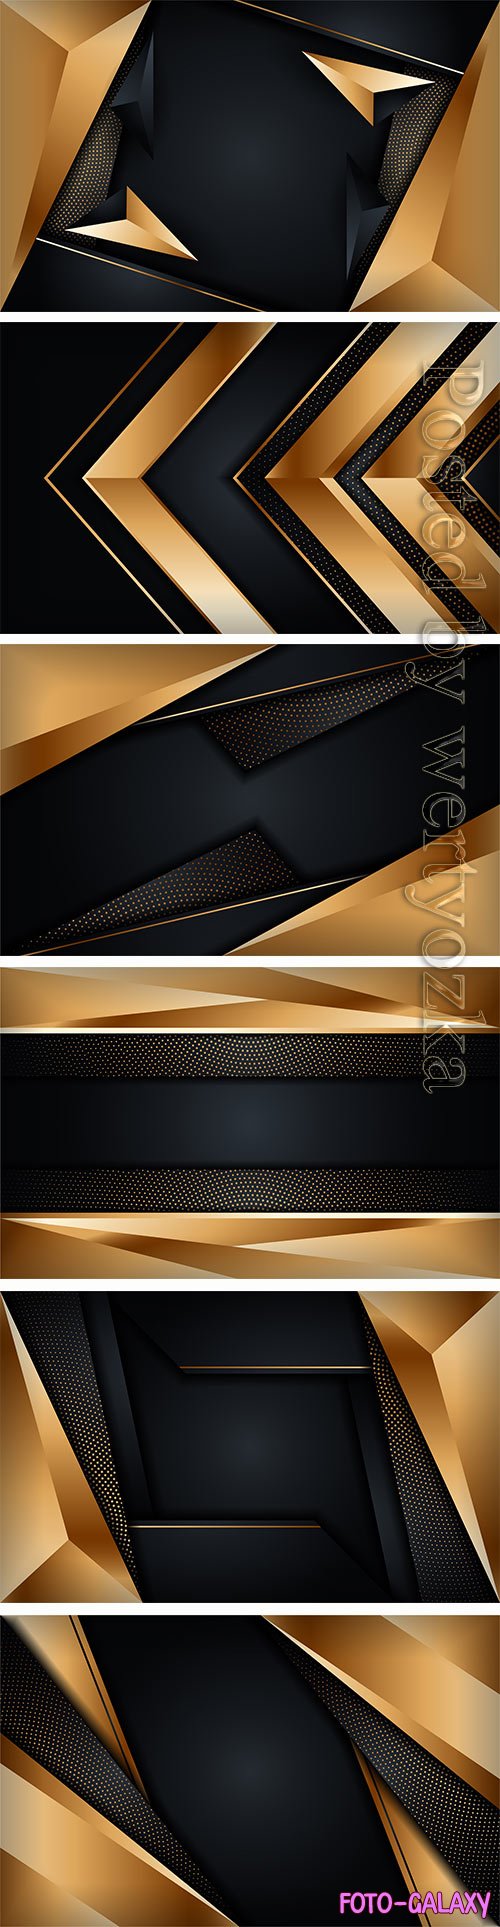 Abstract luxury dark background with golden lines combinations